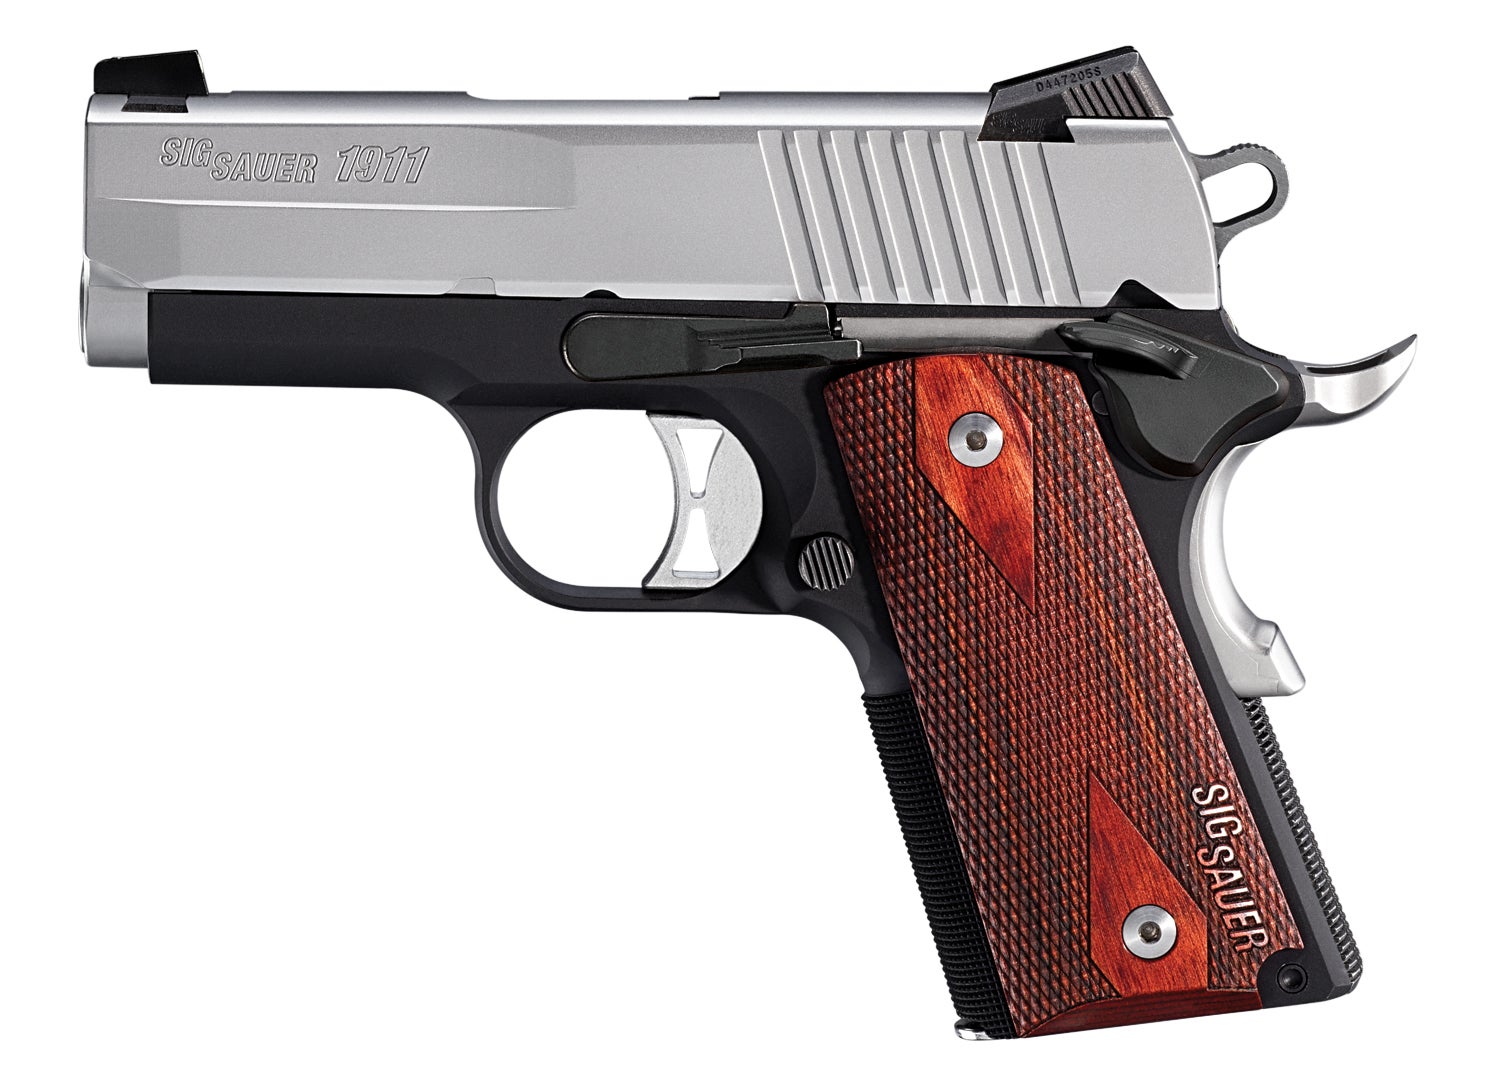  SIG  SAUER  Begins to Ship 1911 Ultra Compact in 9mm  The 